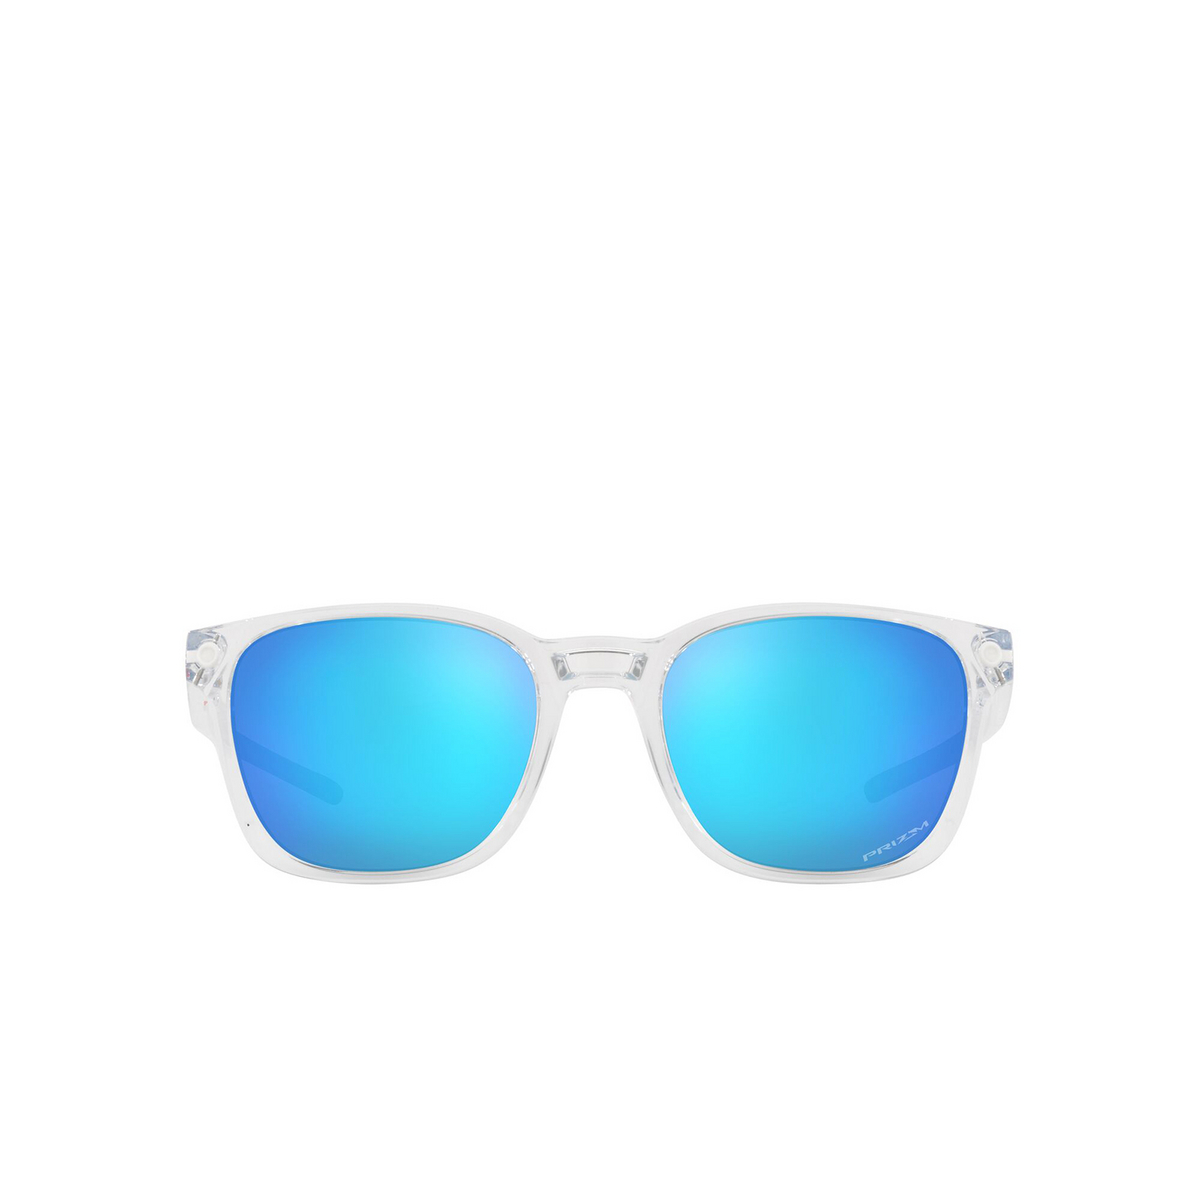 Oakley® Square Sunglasses: Ojector OO9018 color Polished Clear 901802 - front view.